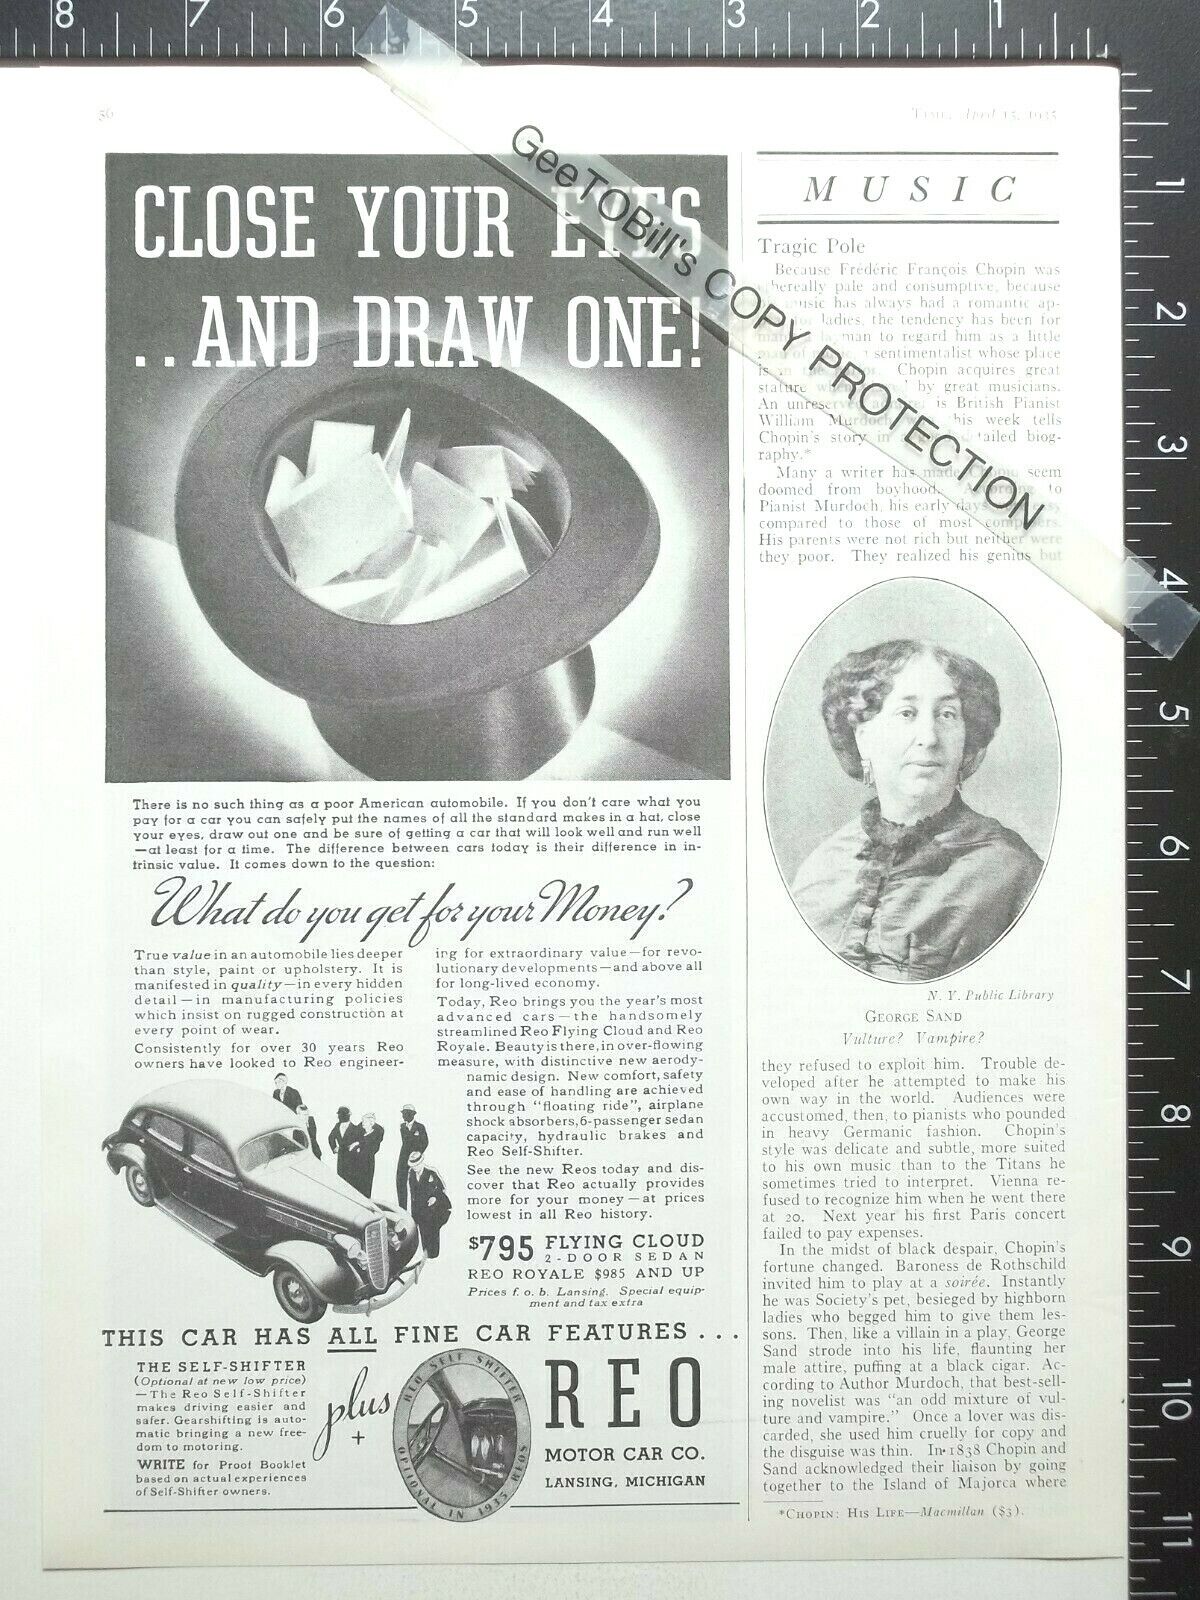 1935 ADVERTISING for REO Flying Cloud Royale Motor Car with self-shifter